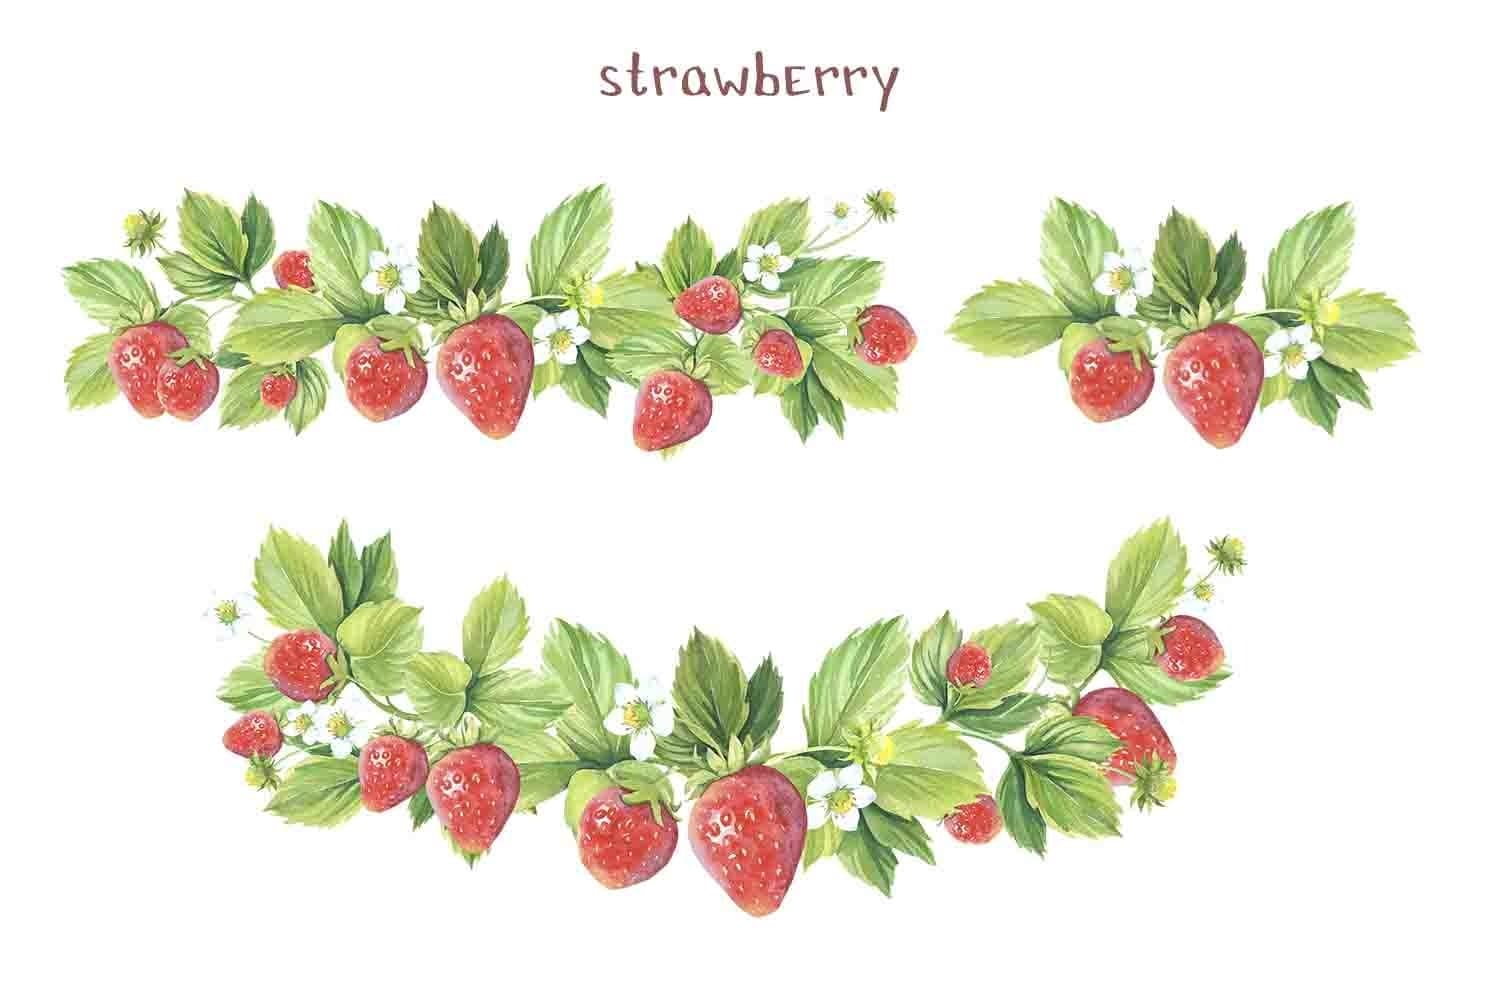 Strawberries are drawn in combination with leaves.